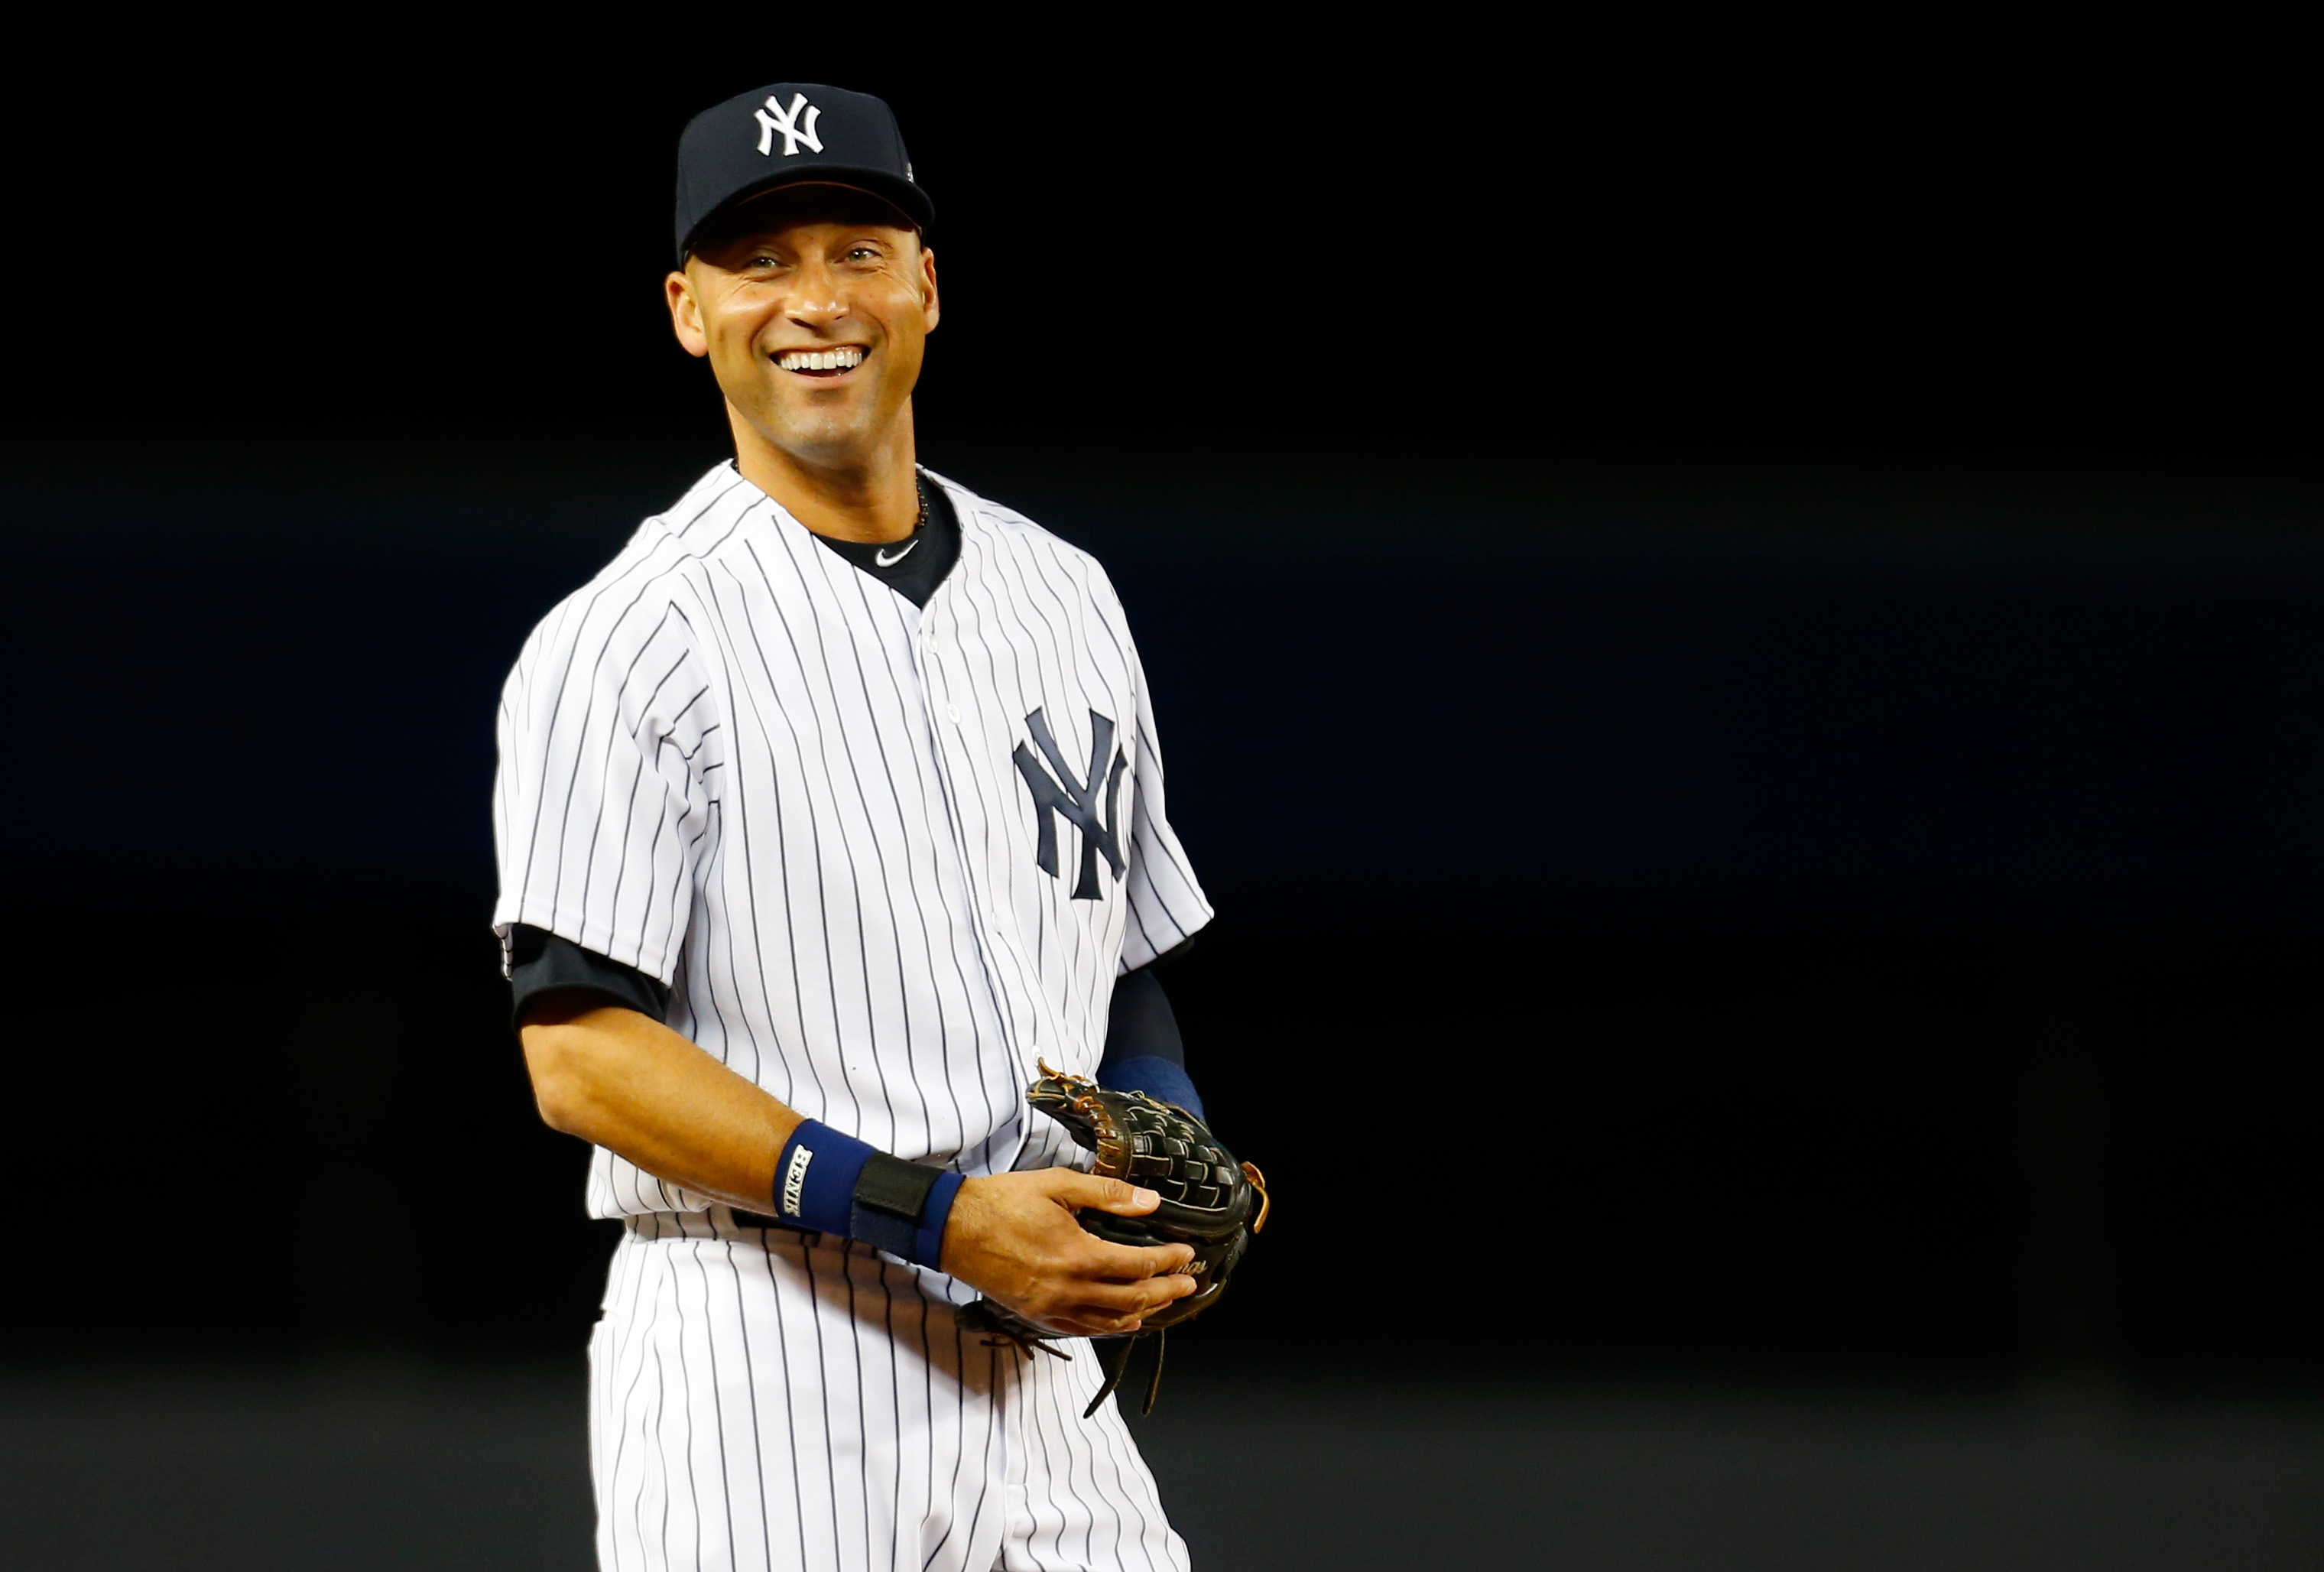 Derek Jeter #2 of the New York Yankees smiles prior to a game against the Baltimore Orioles at Yankee Stadium on September 22, 2014. (Mike Stobe&mdash;Getty Images)